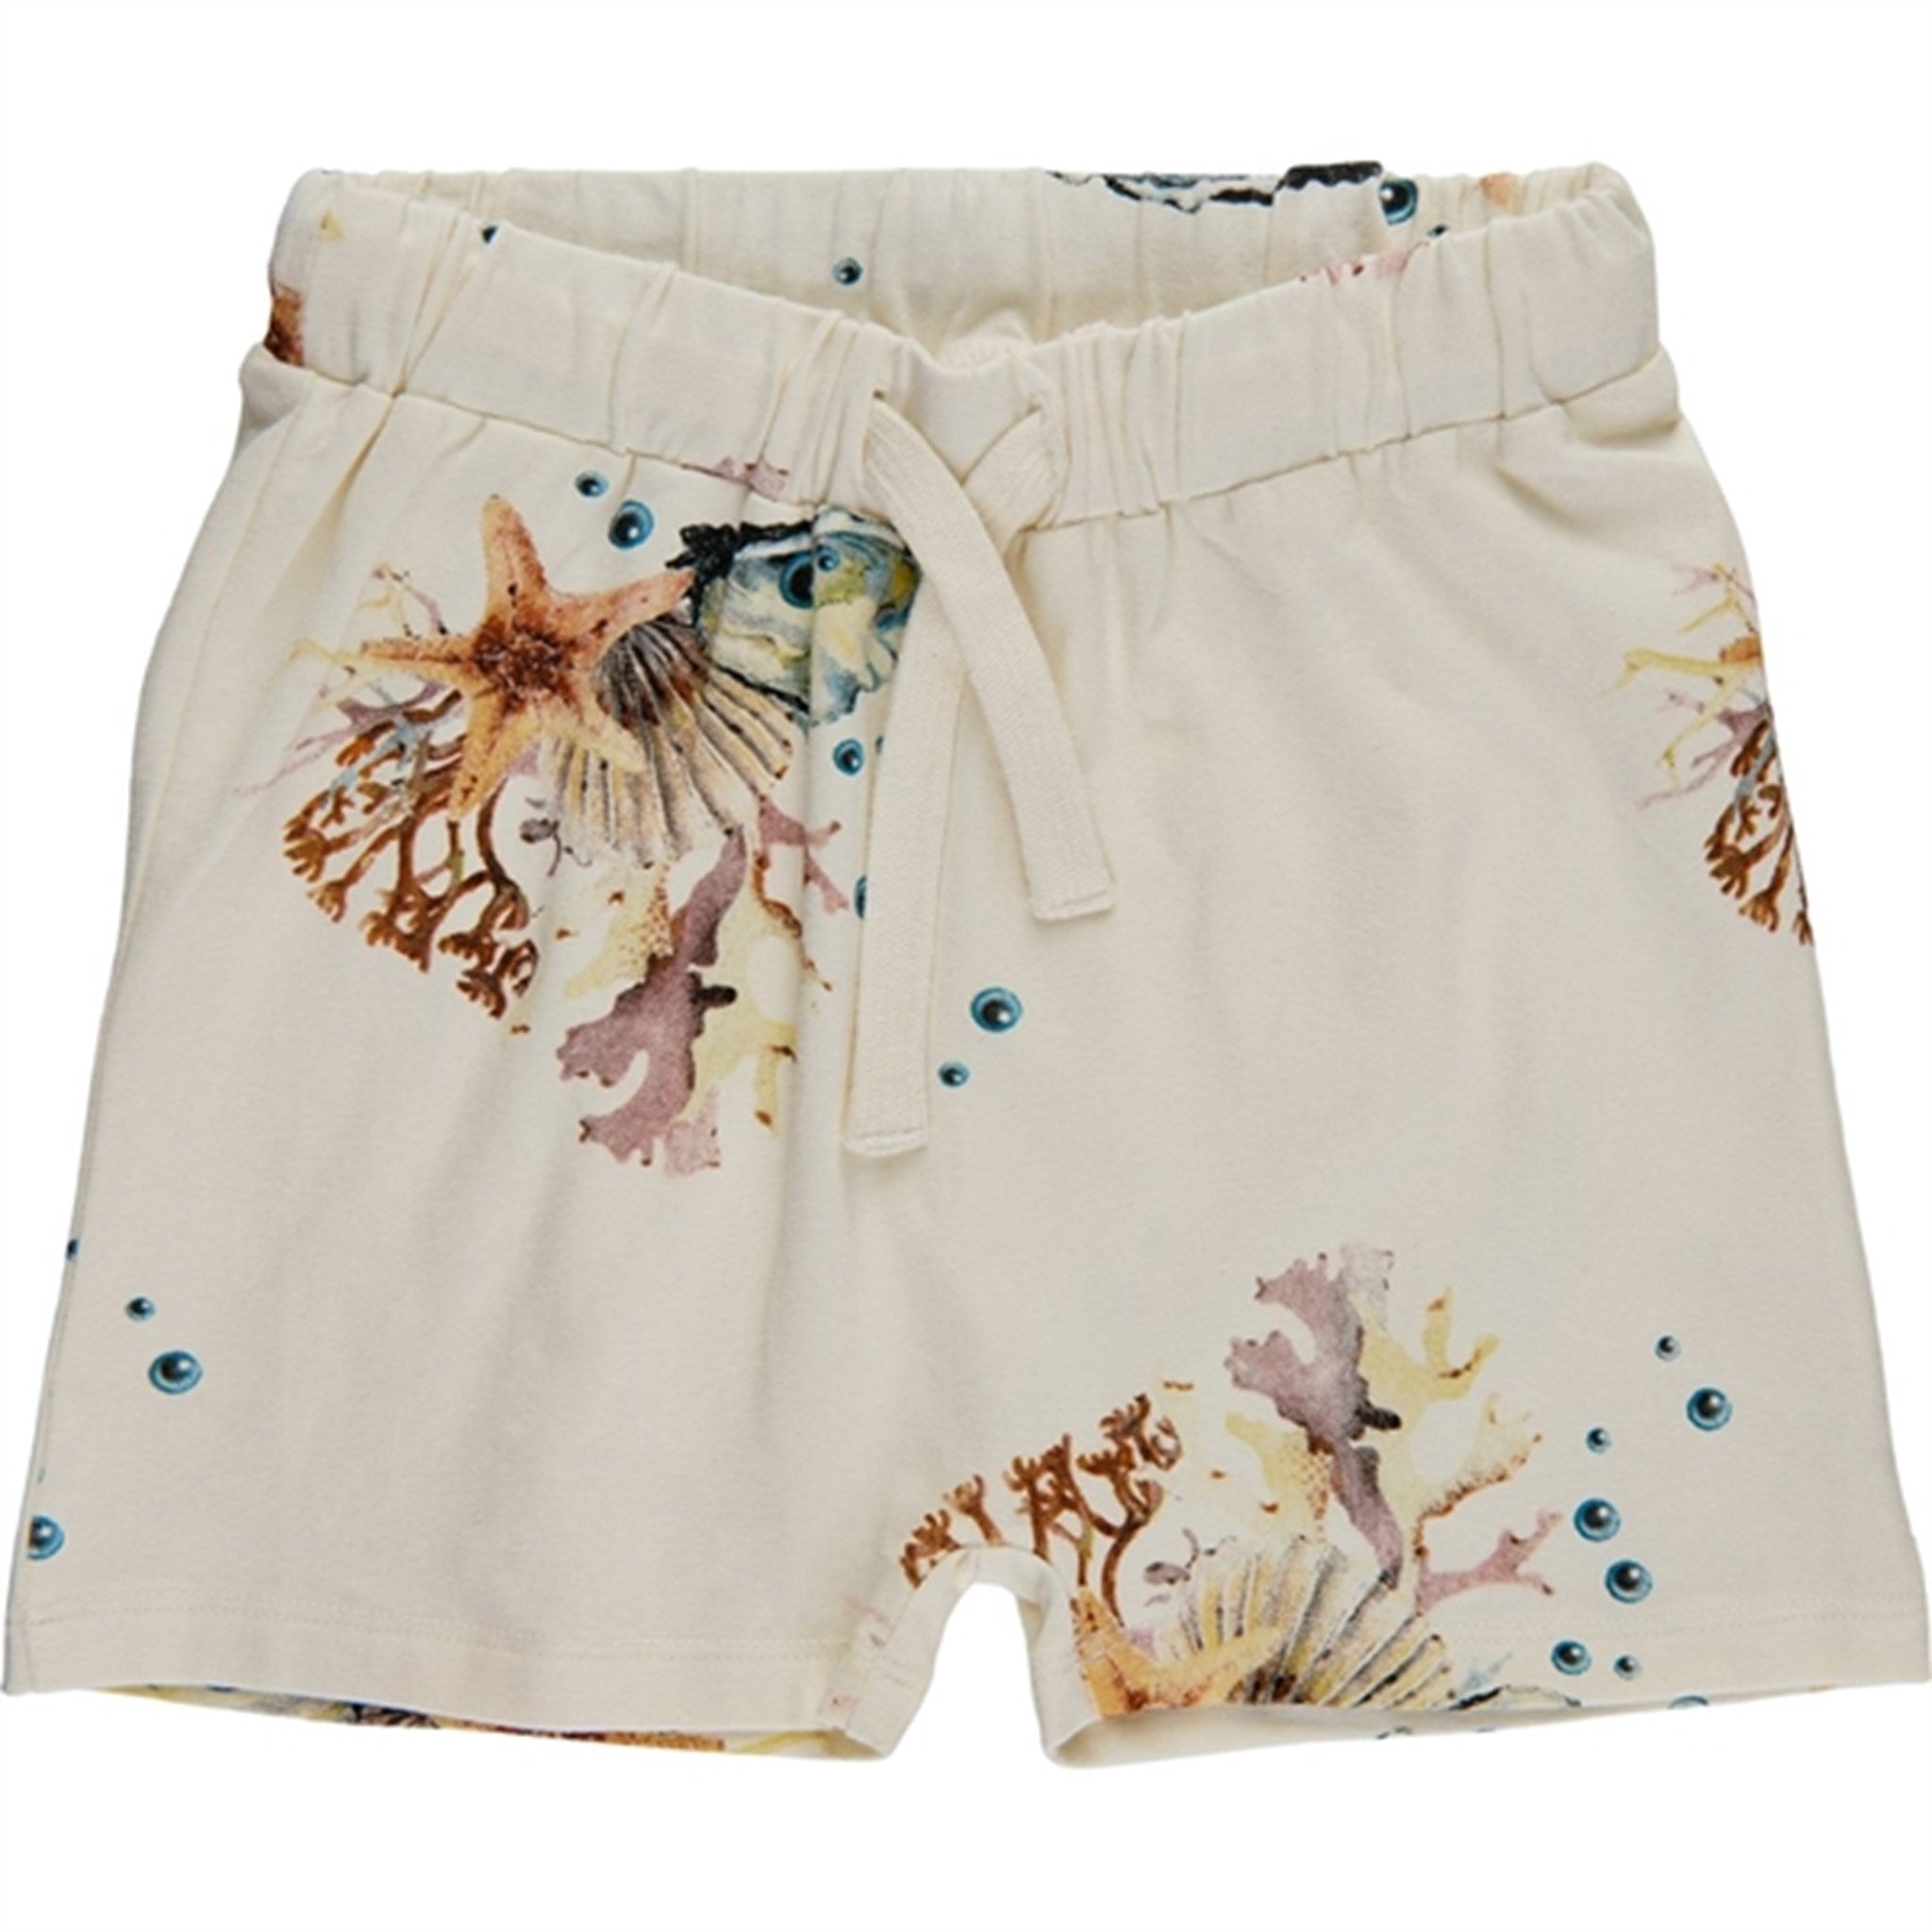 THE NEW Siblings White Swan Coral AOP Gaige Shorts